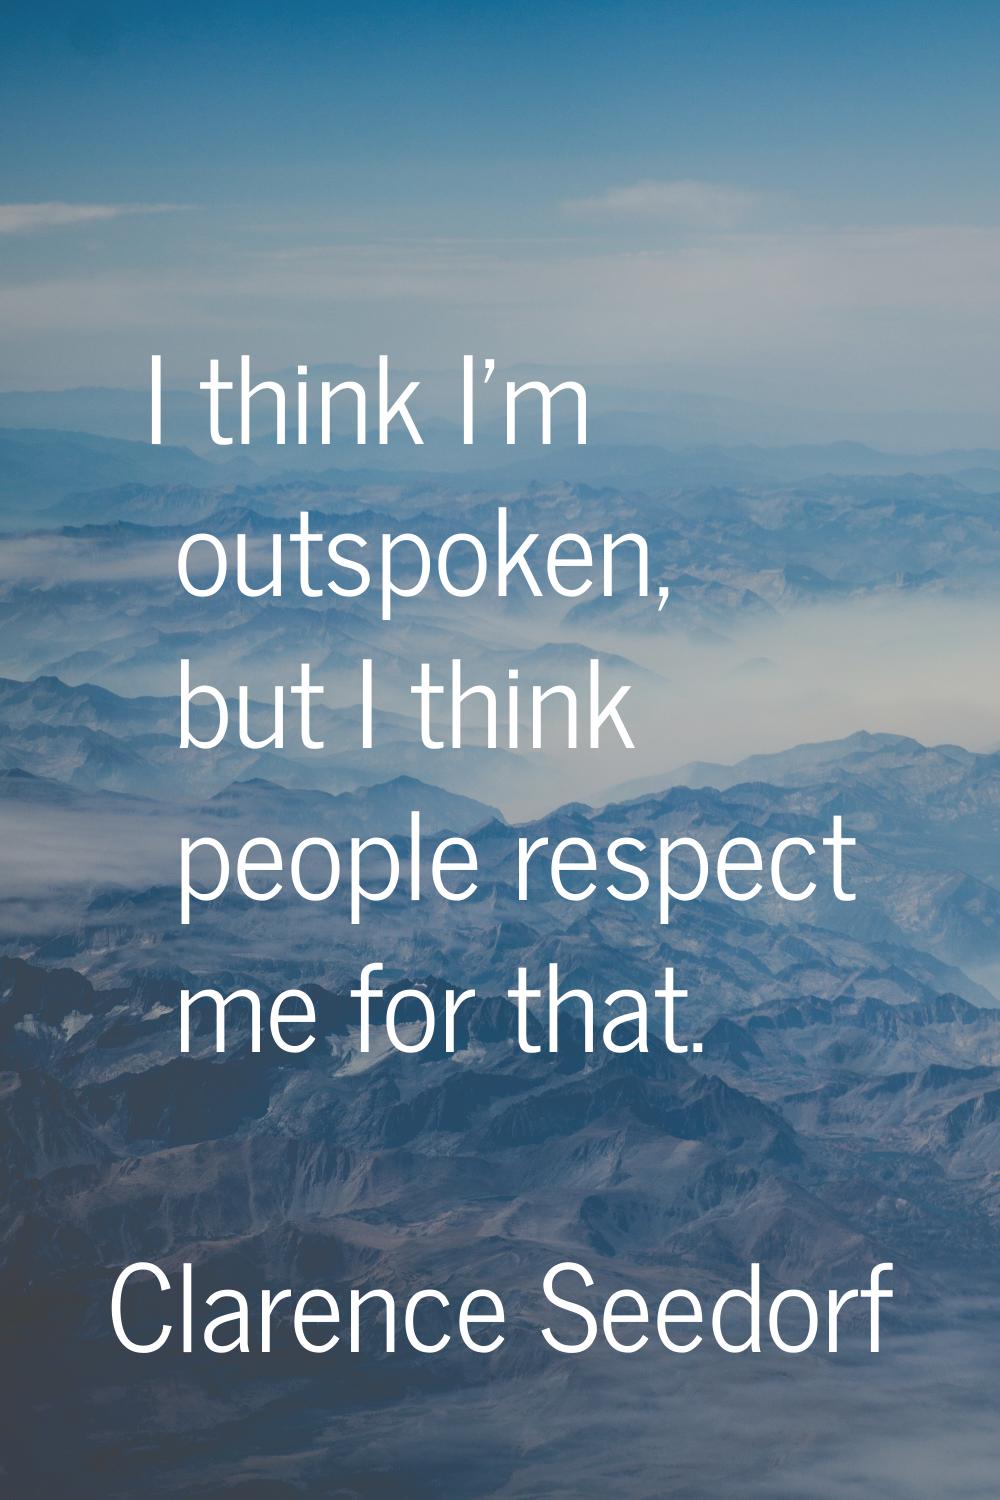 I think I'm outspoken, but I think people respect me for that.